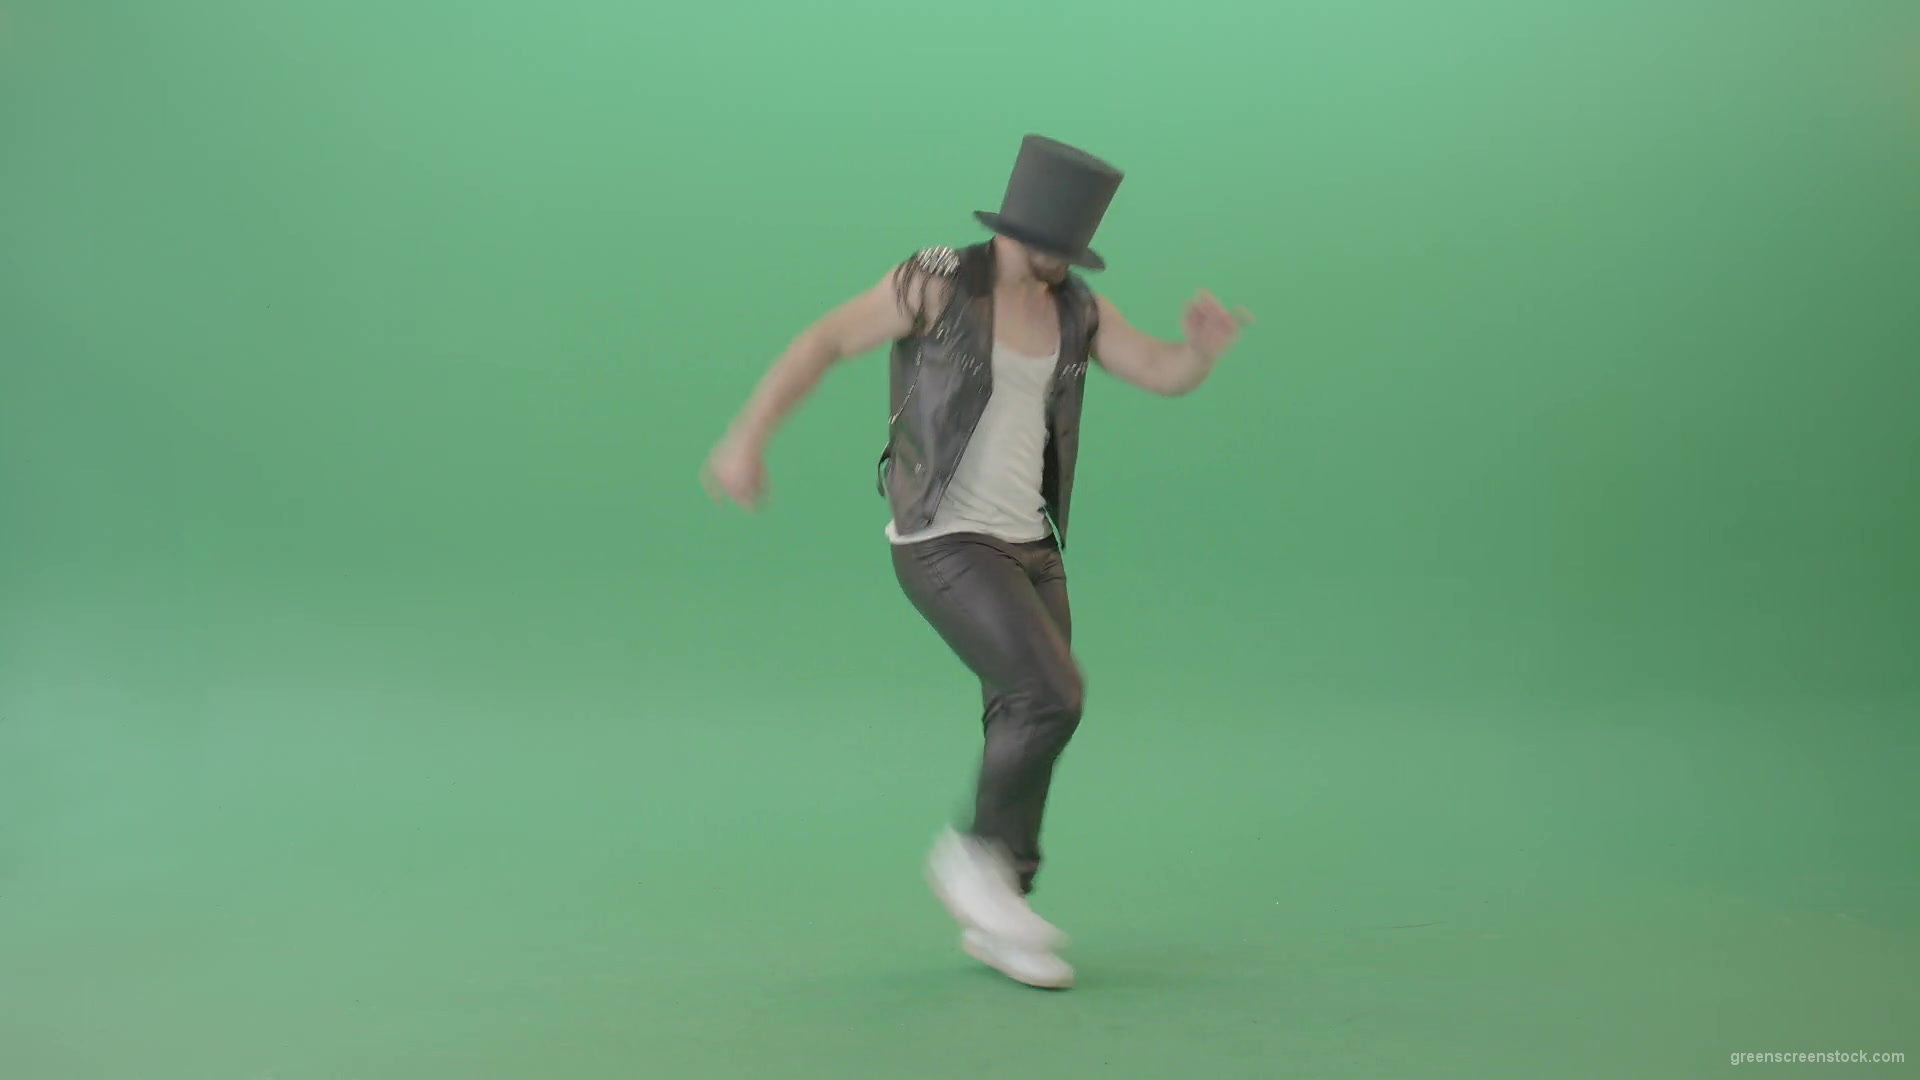 Man-in-black-Busines-Cylinder-Hat-dancing-and-jumping-in-Shuffle-dance-isolated-on-Green-Screen-4K-Video-Footage-1920_006 Green Screen Stock